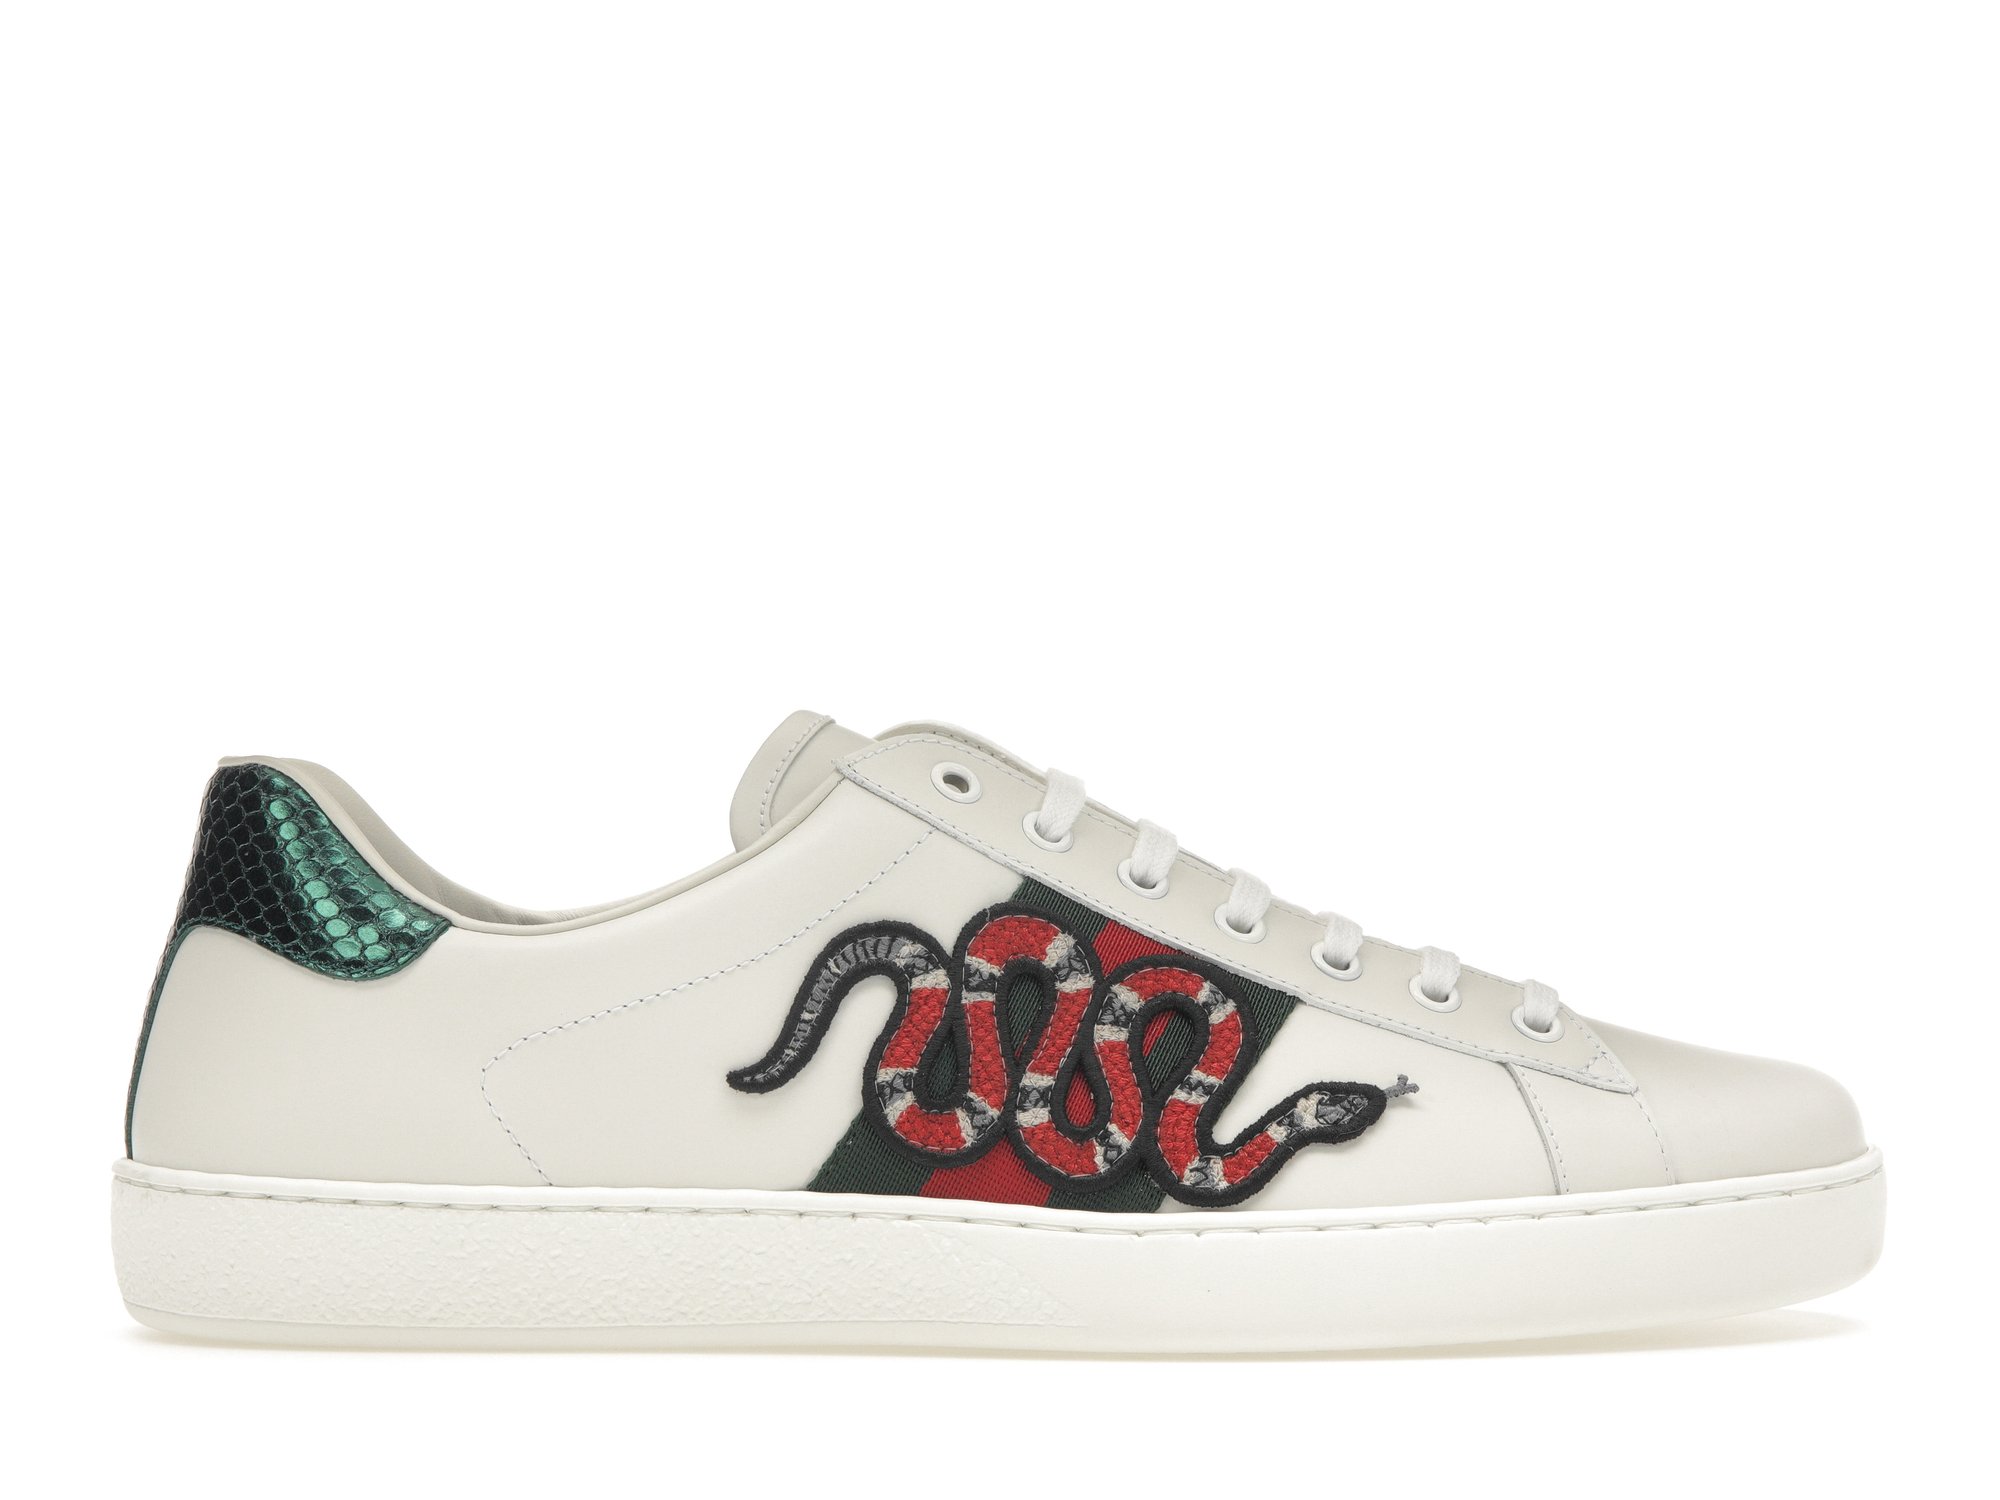 Gucci Ace Embroidered Snake